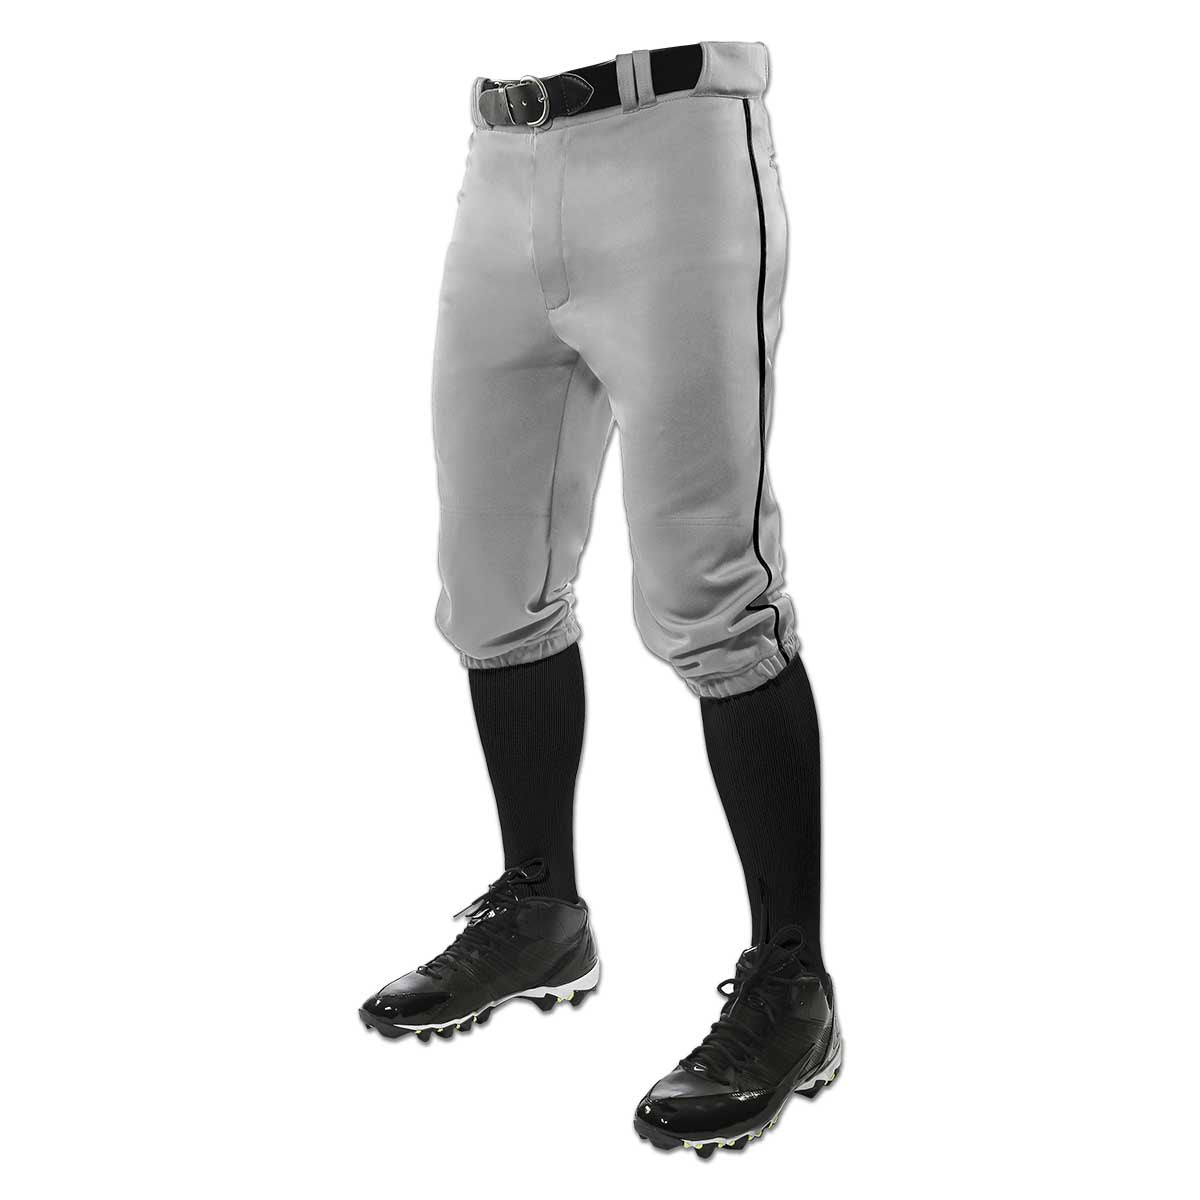 Knicker Knee Length Baseball Pant With Piping GREY BODY, BLACK PIPE